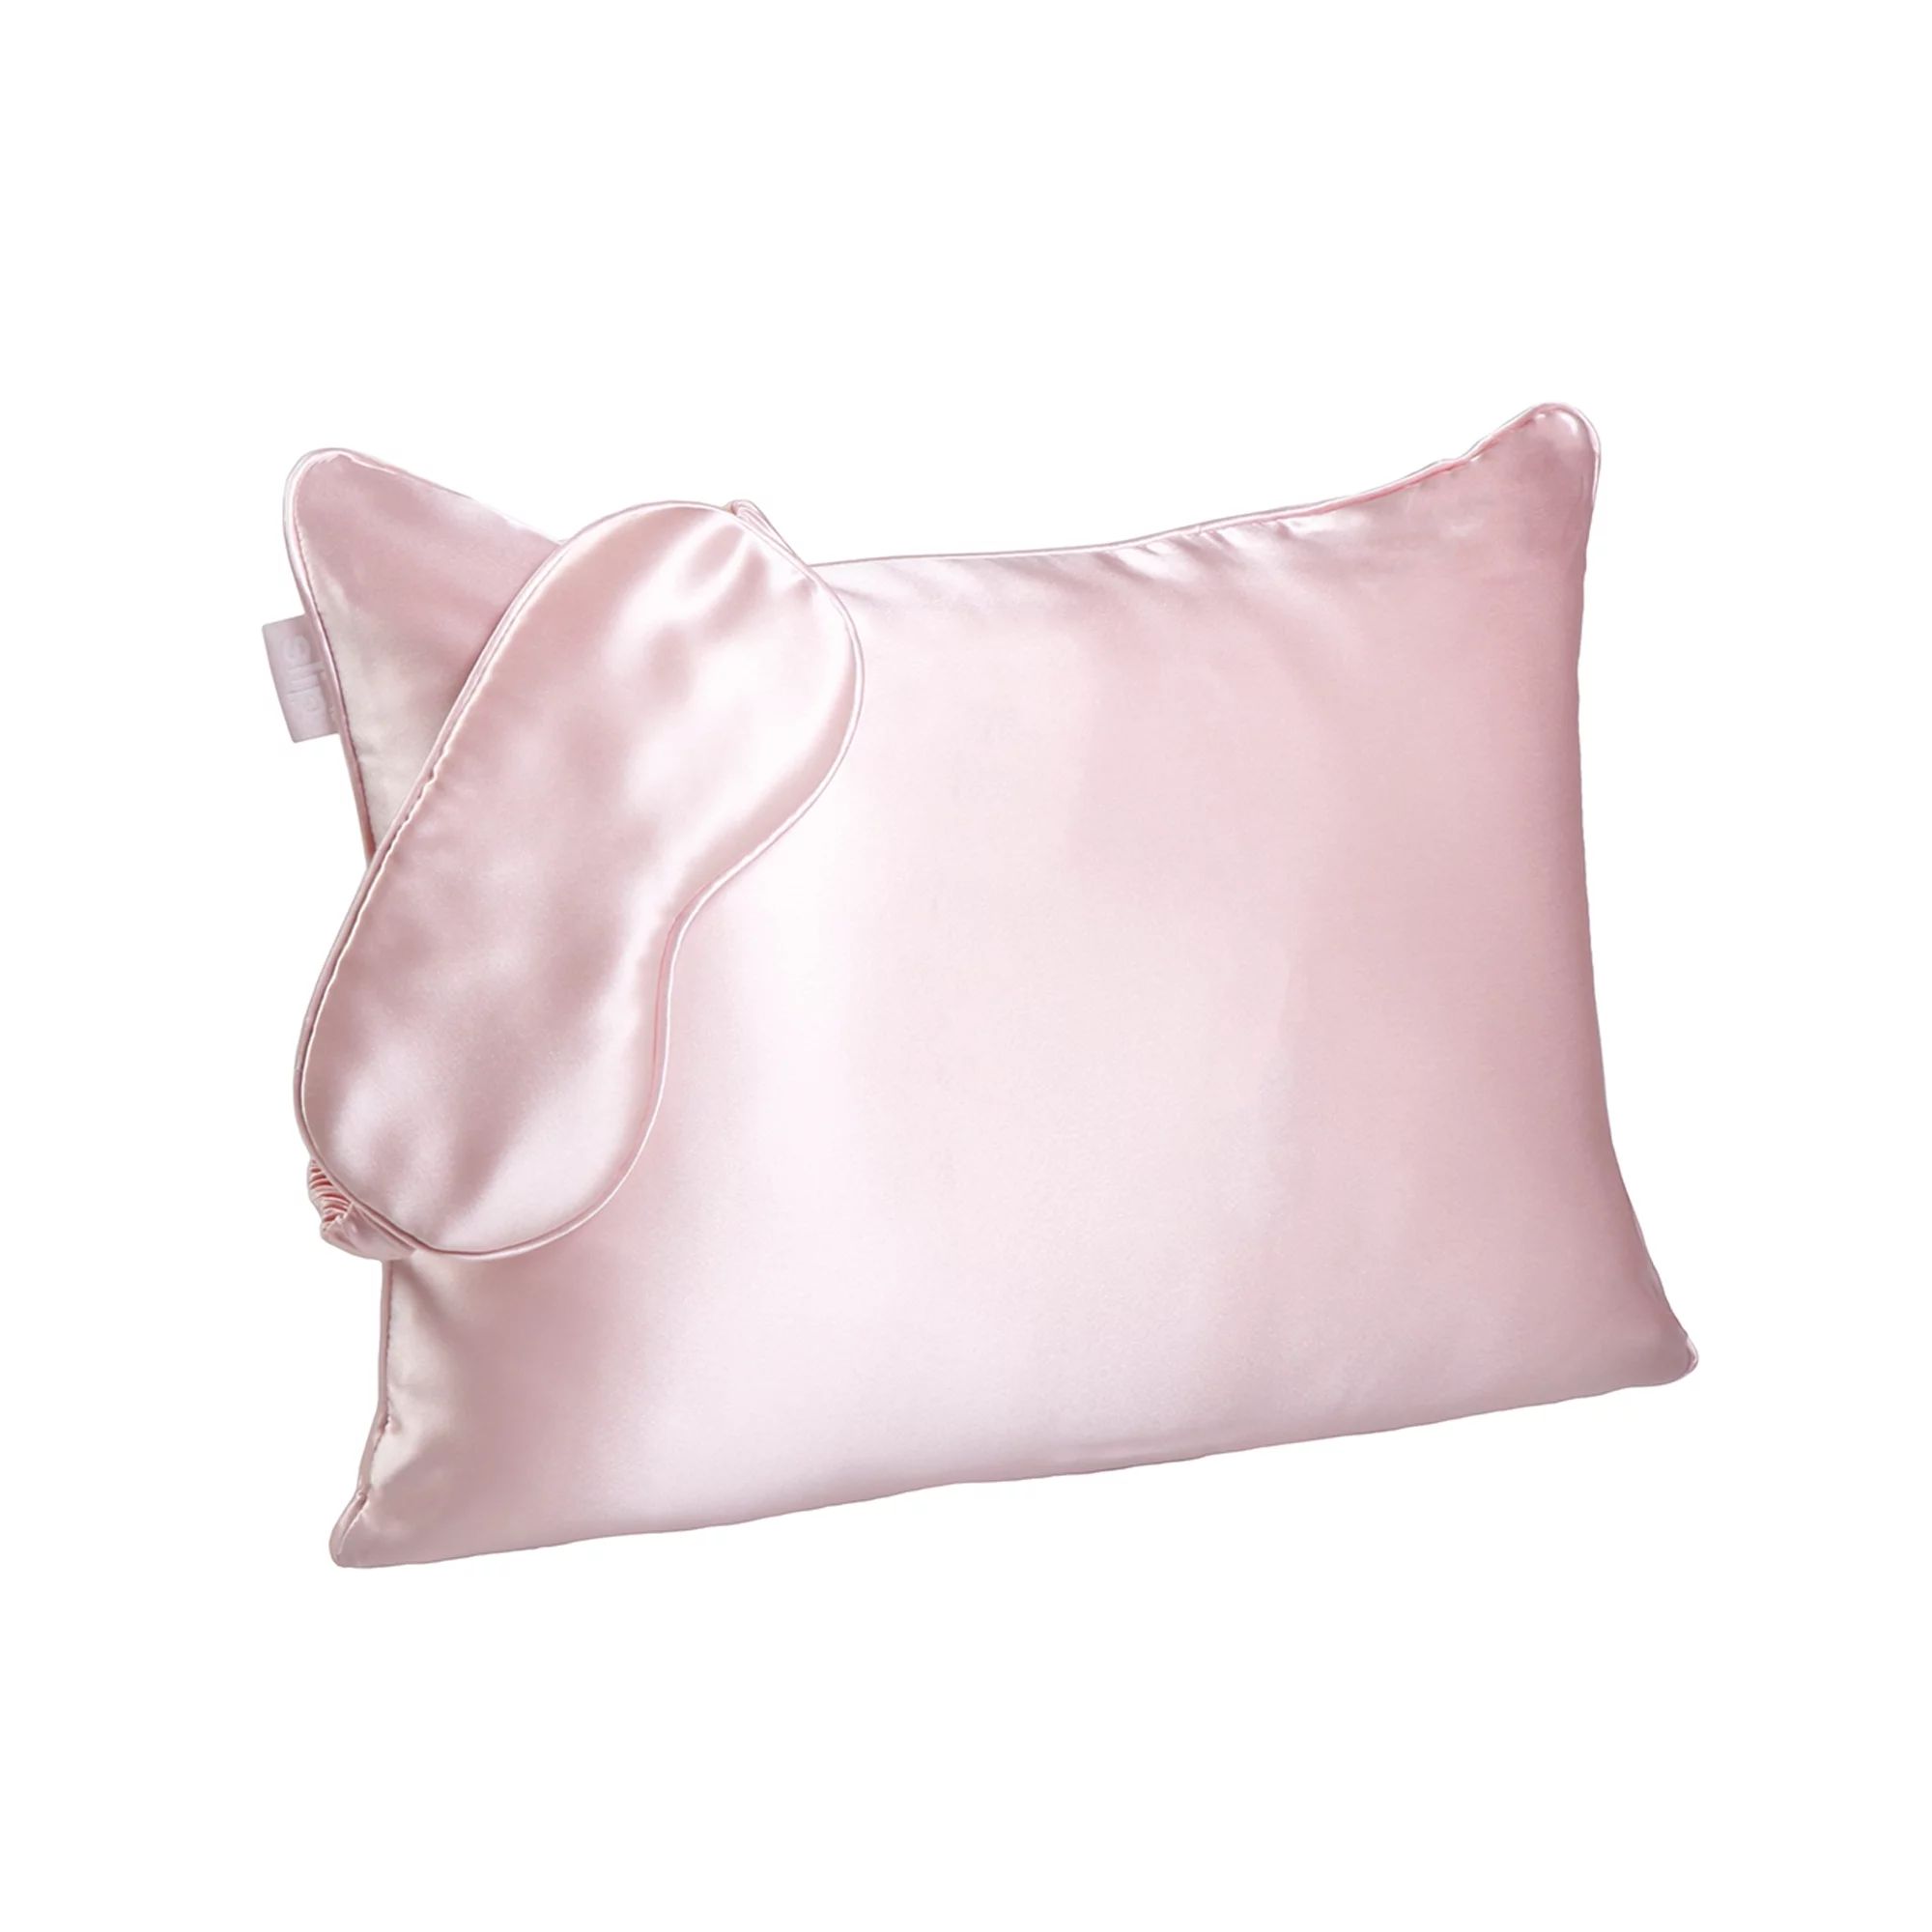 Slip Beauty Sleep To Go, Removable Pillowcase, with Pillow, Pink, Travel Set | Walmart (US)